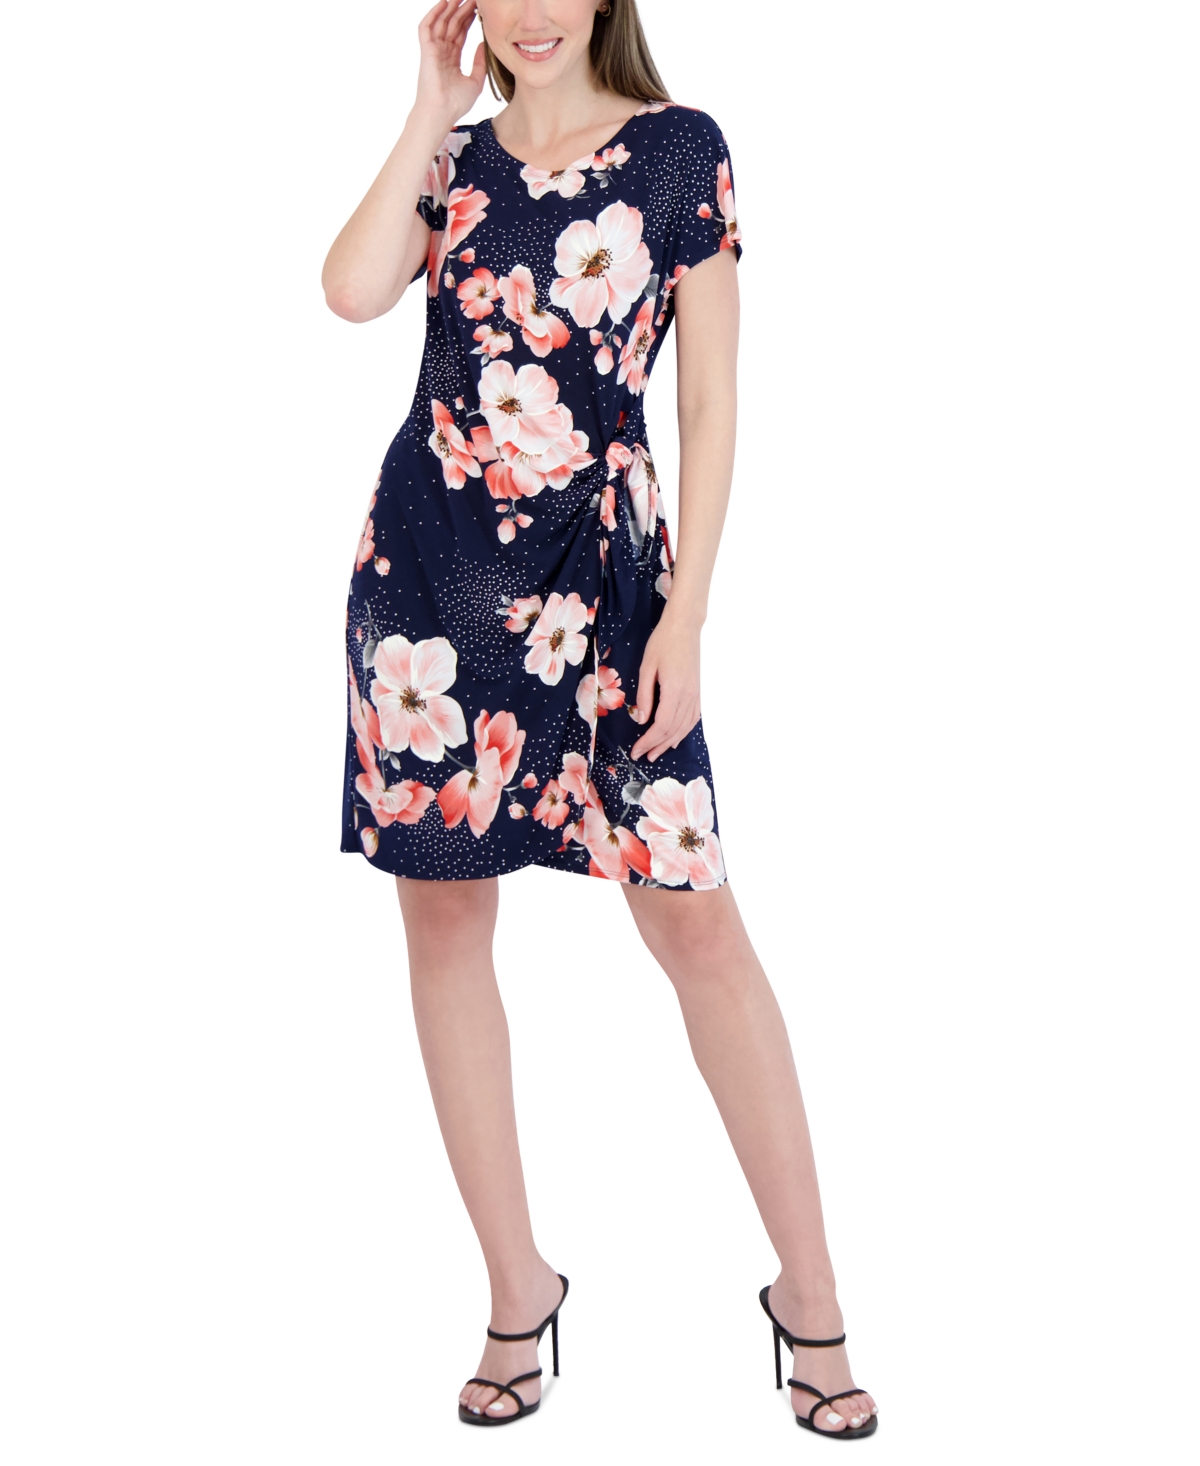 Petite Floral Print Tied A-Line Dress - Navy/coral